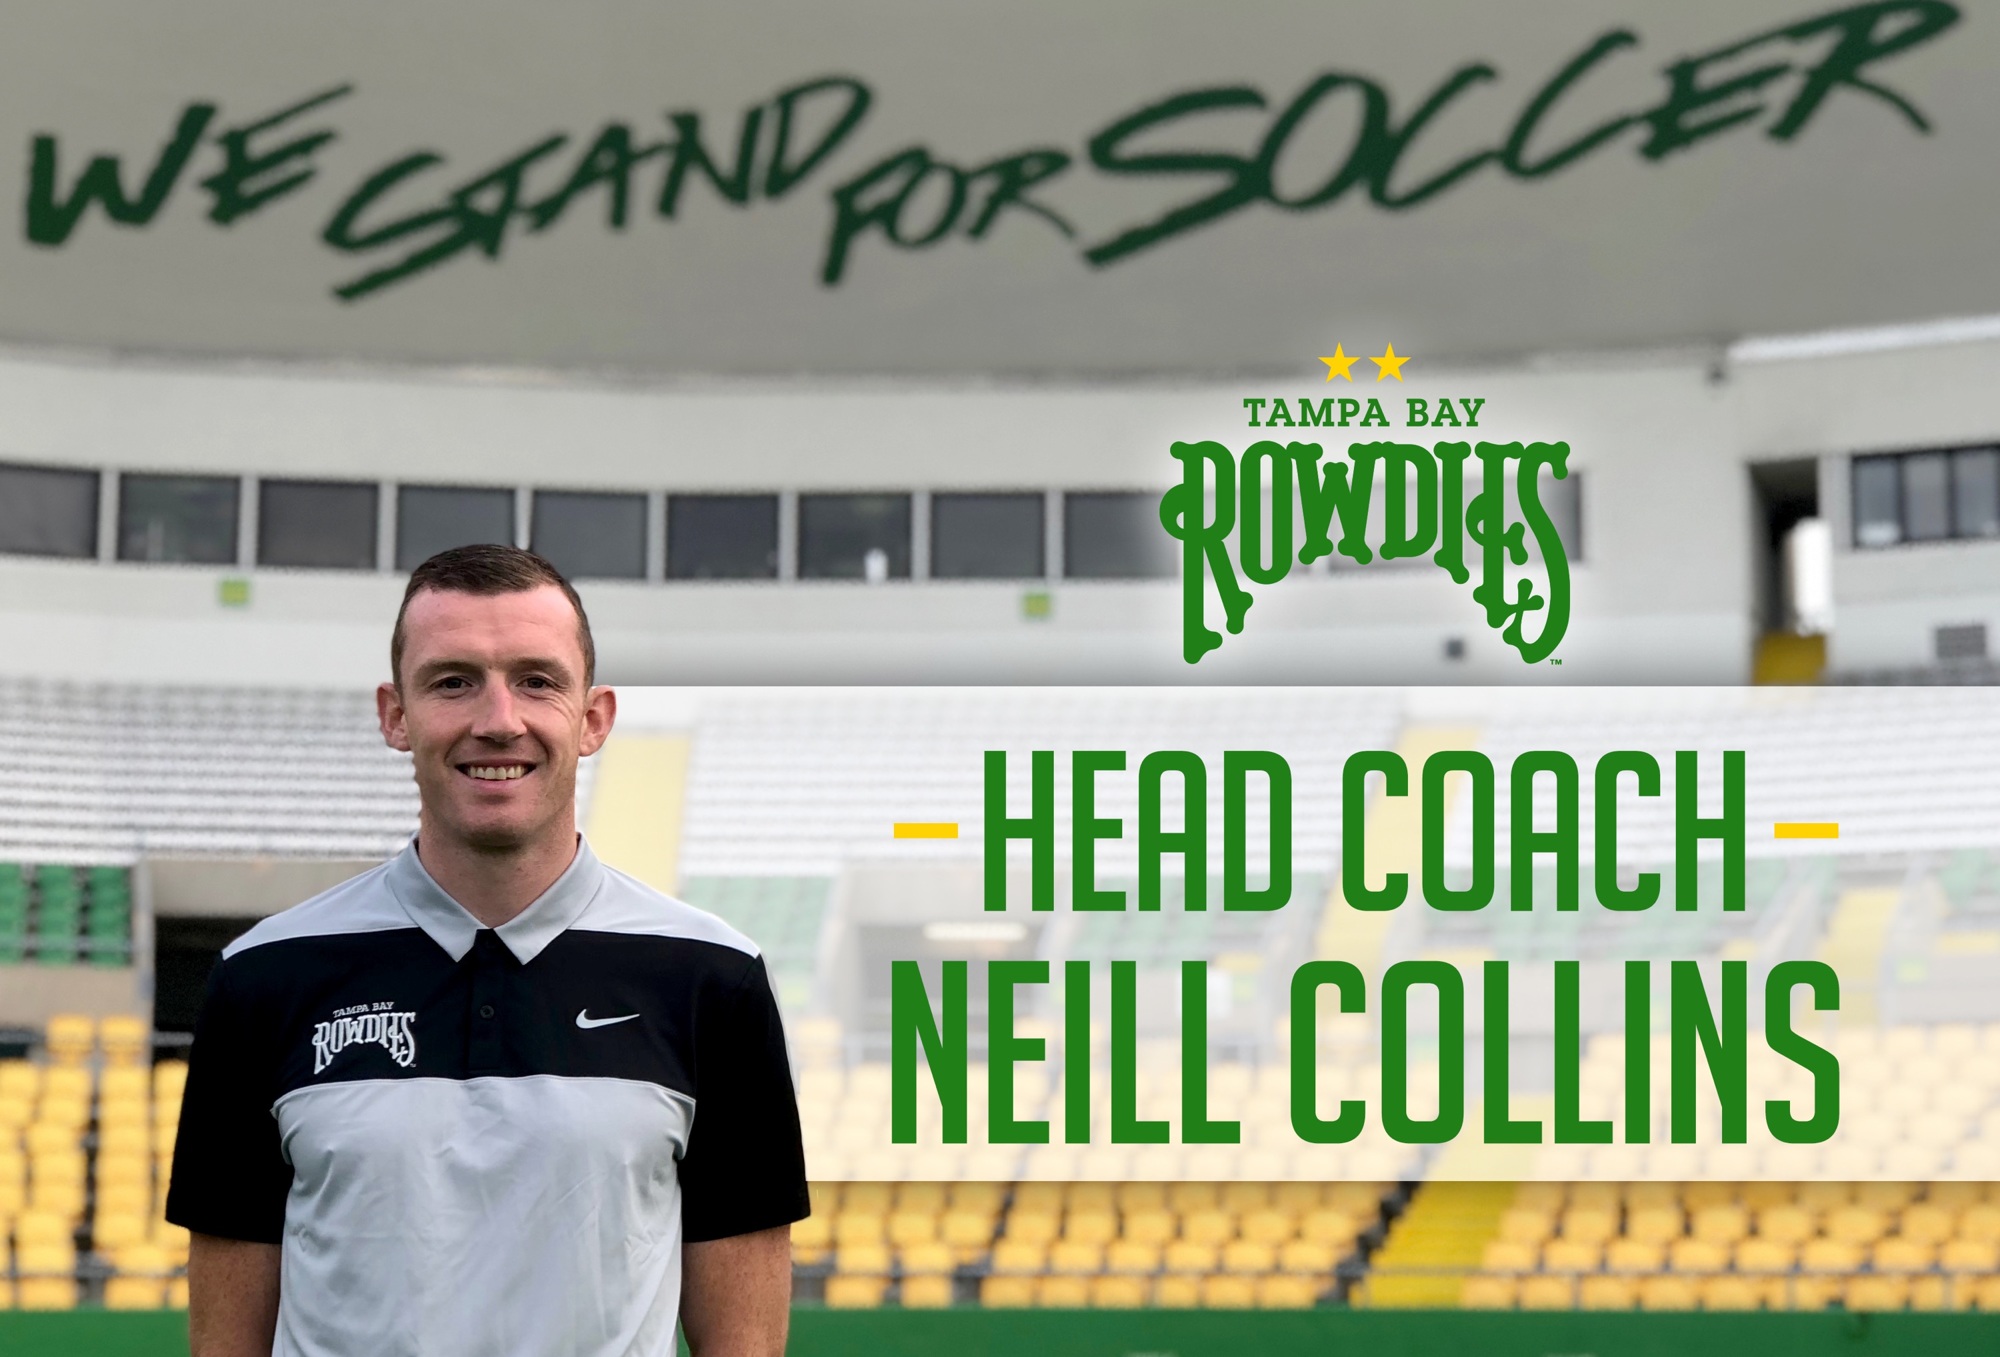 Neill Collins, 34, is the new head coach of the Tampa Bay Rowdies soccer club, succeeding Stuart Campbell. Courtesy photo.